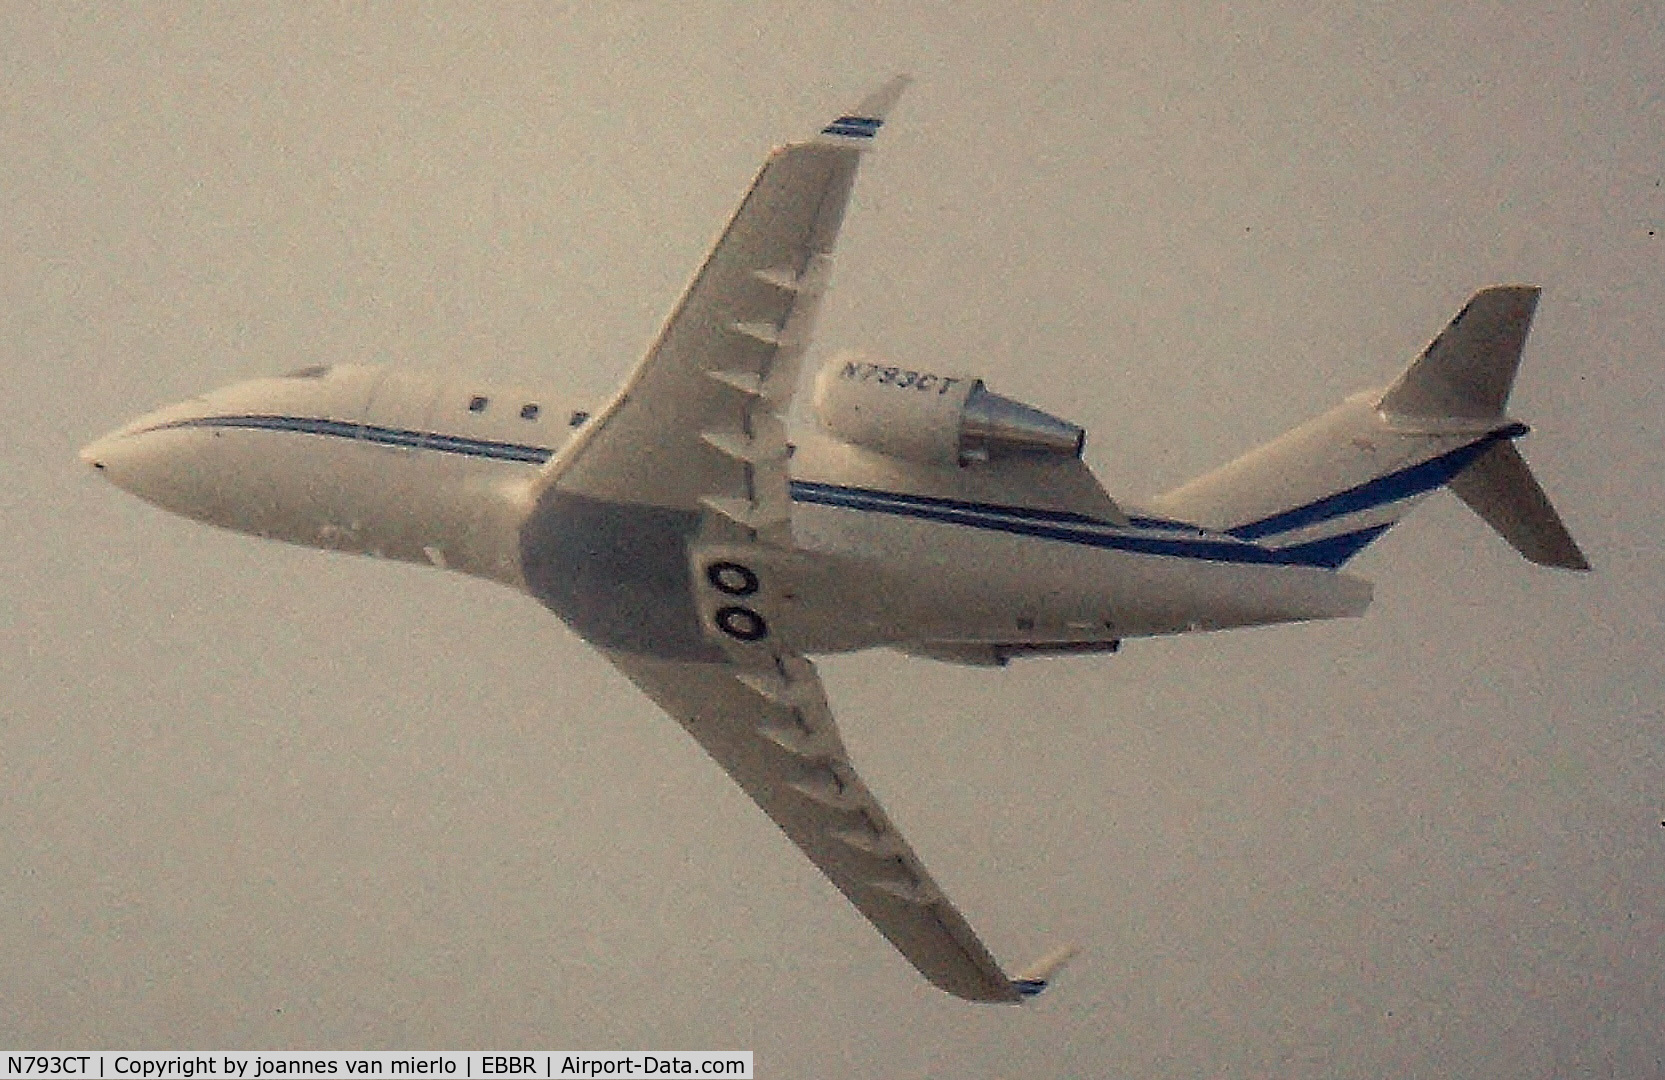 N793CT, 2006 Bombardier Challenger 604 C/N 5643, Airborne & banking from rwy 25r Brussels